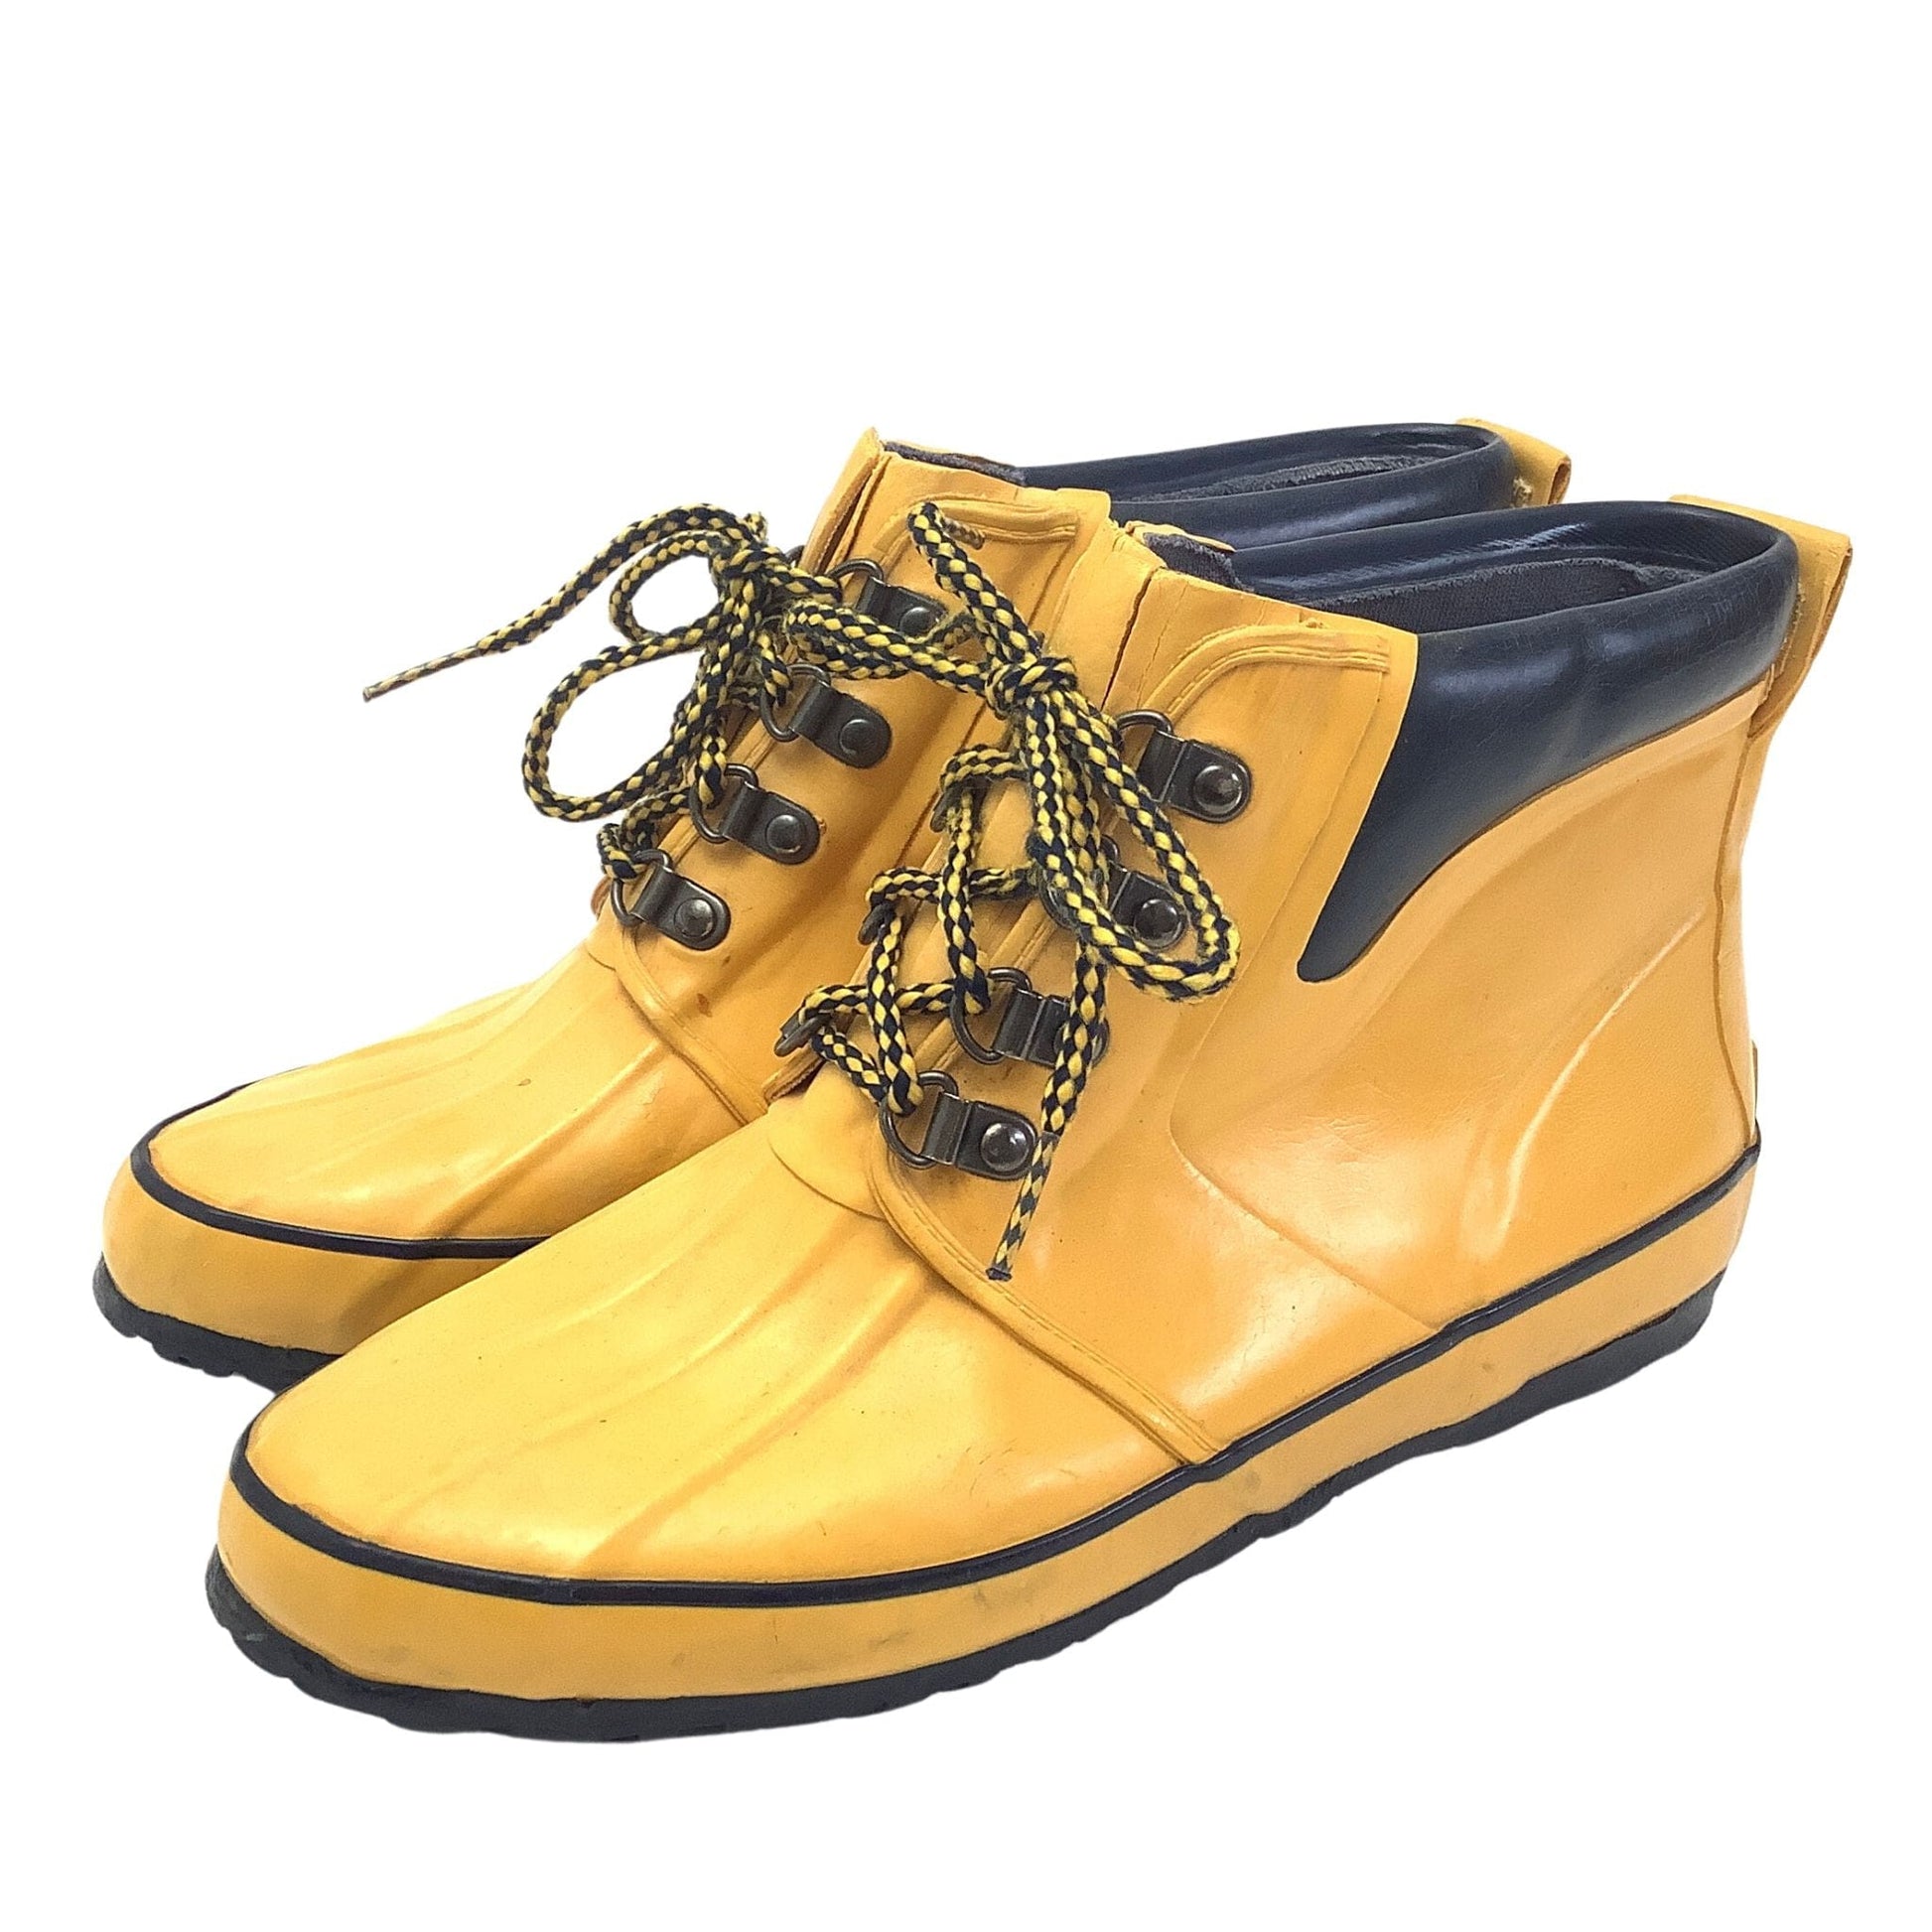 Destroyed Costume Shoes 7 / Yellow / Vintage 1970s